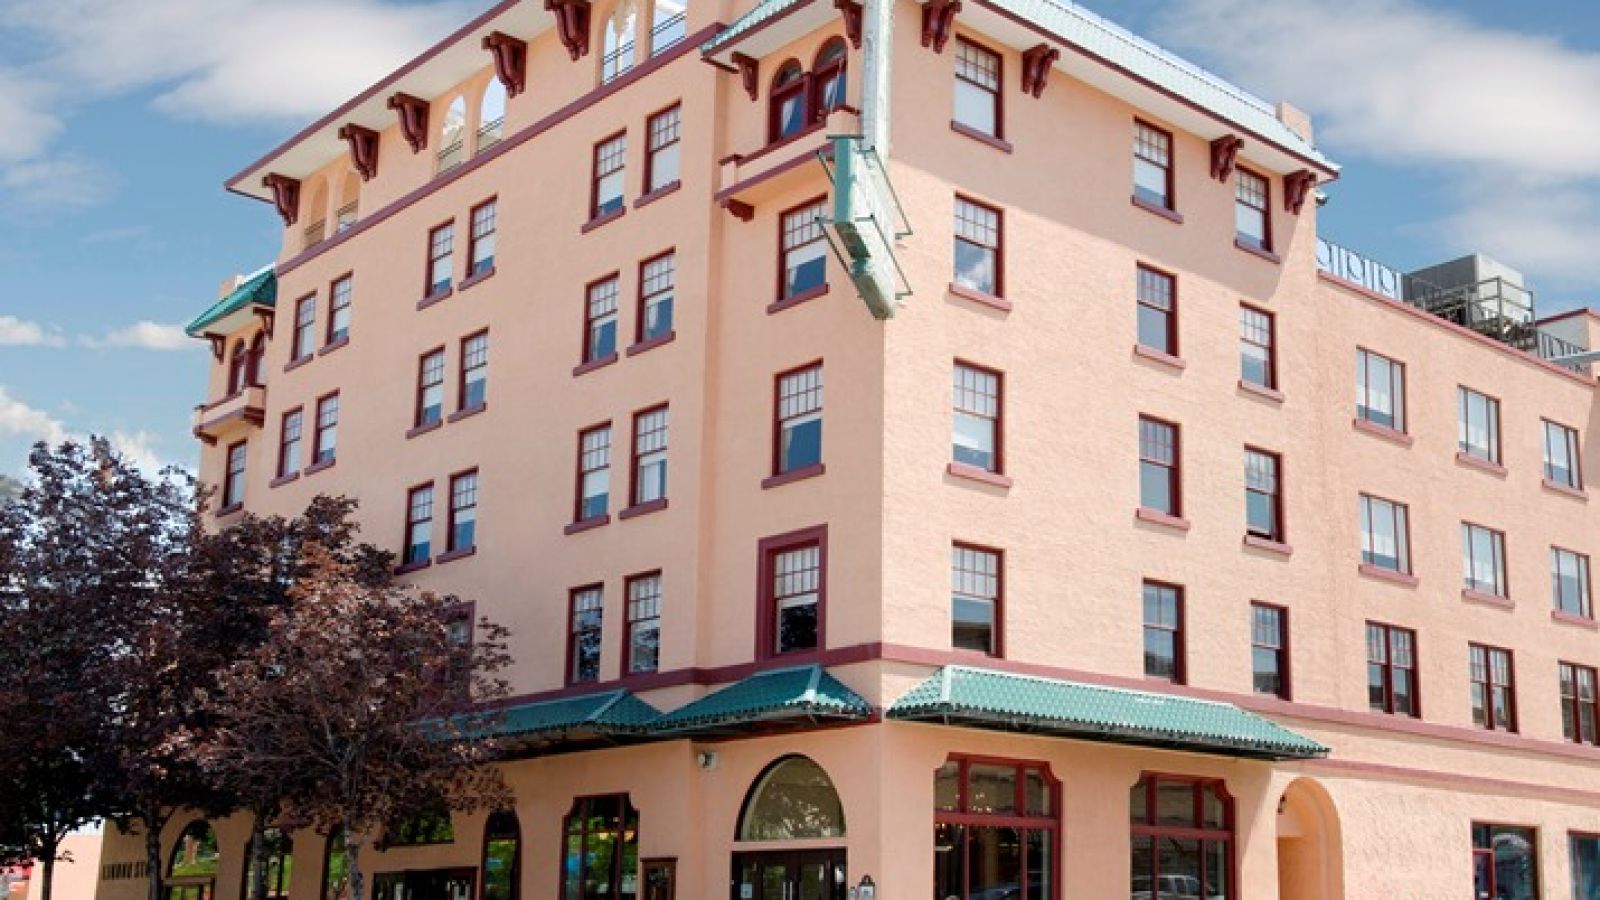 Front View of the Plaza Hotel Kamloops